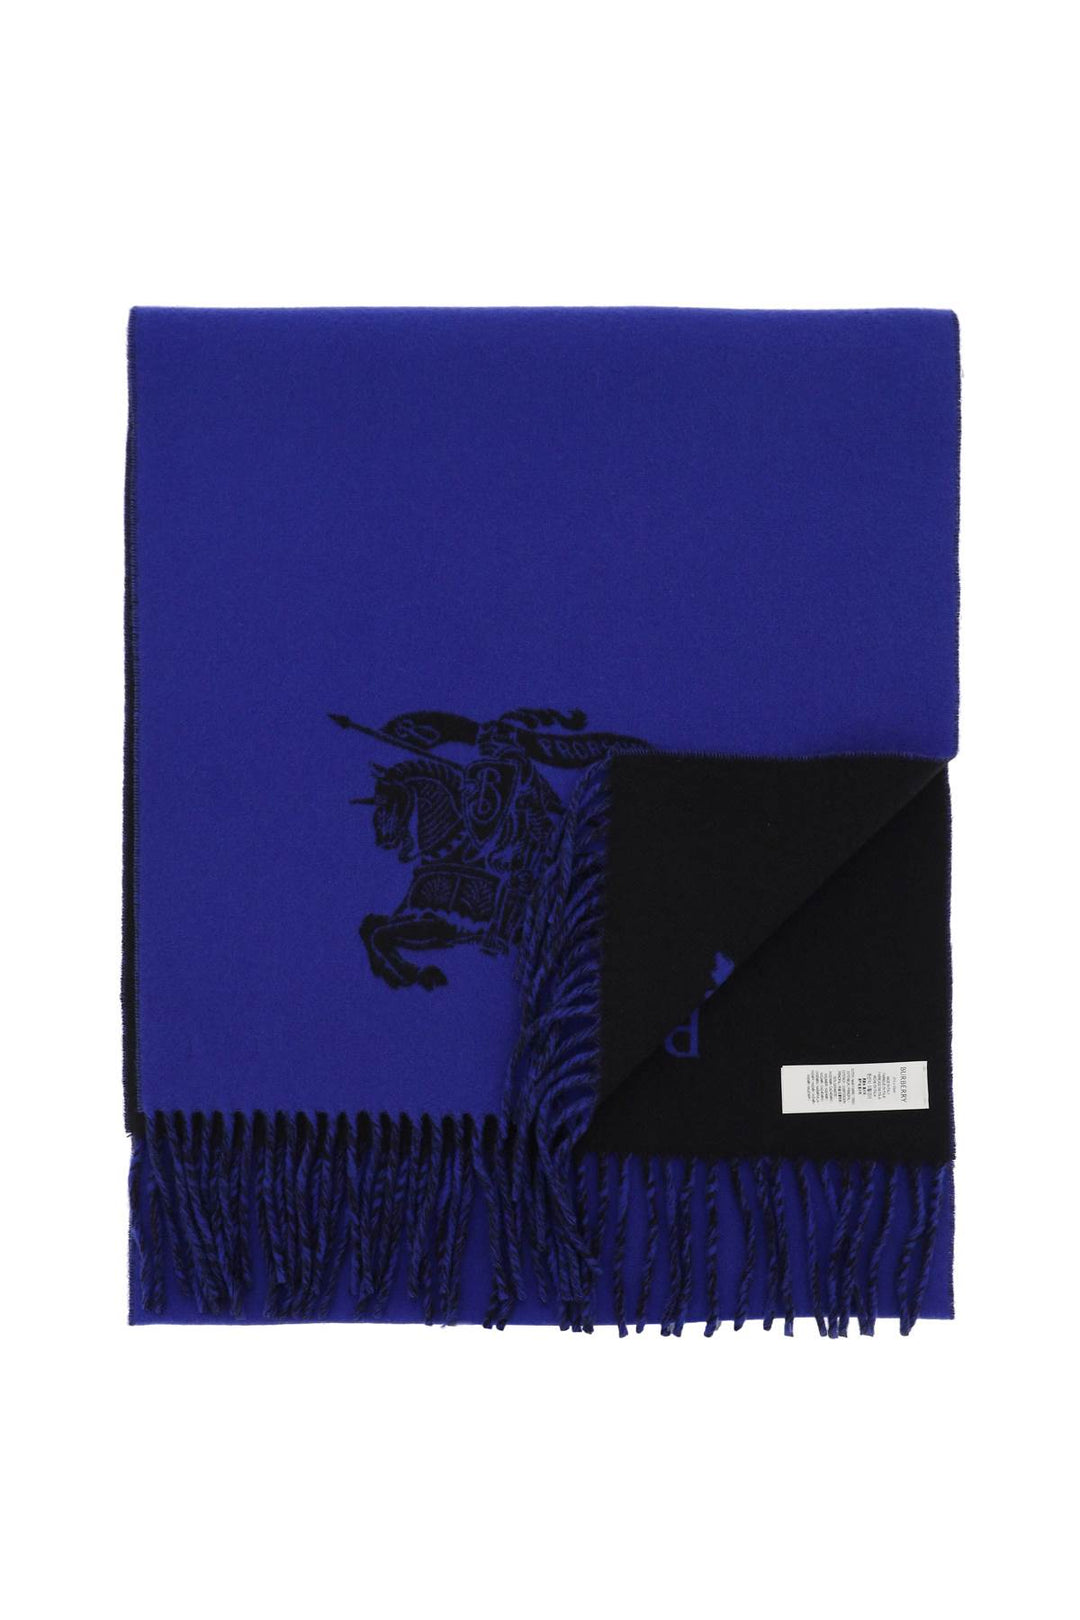 Burberry Reversible Cashmere Scarf With Ekd   Blu